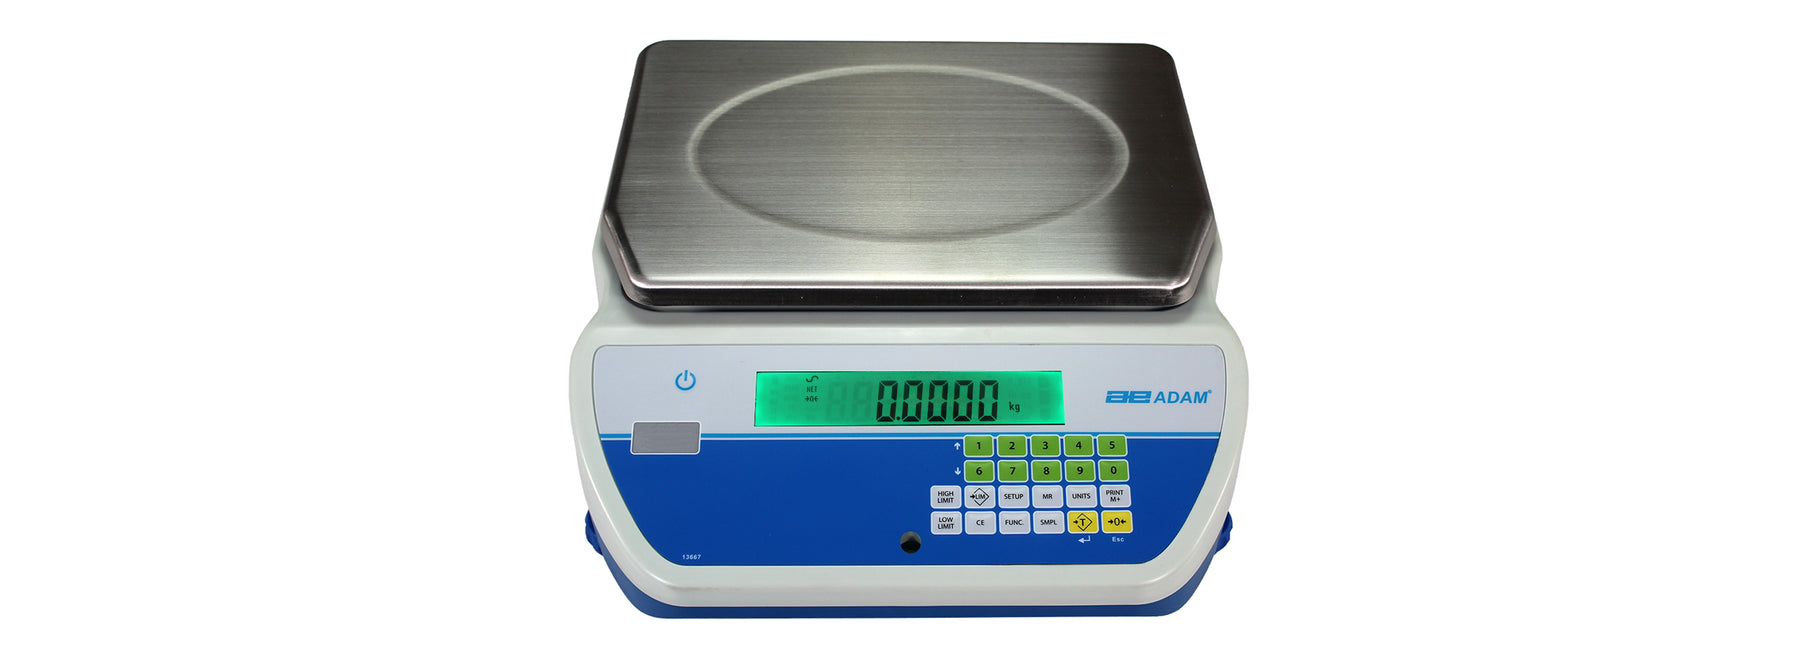 checkweighing scales